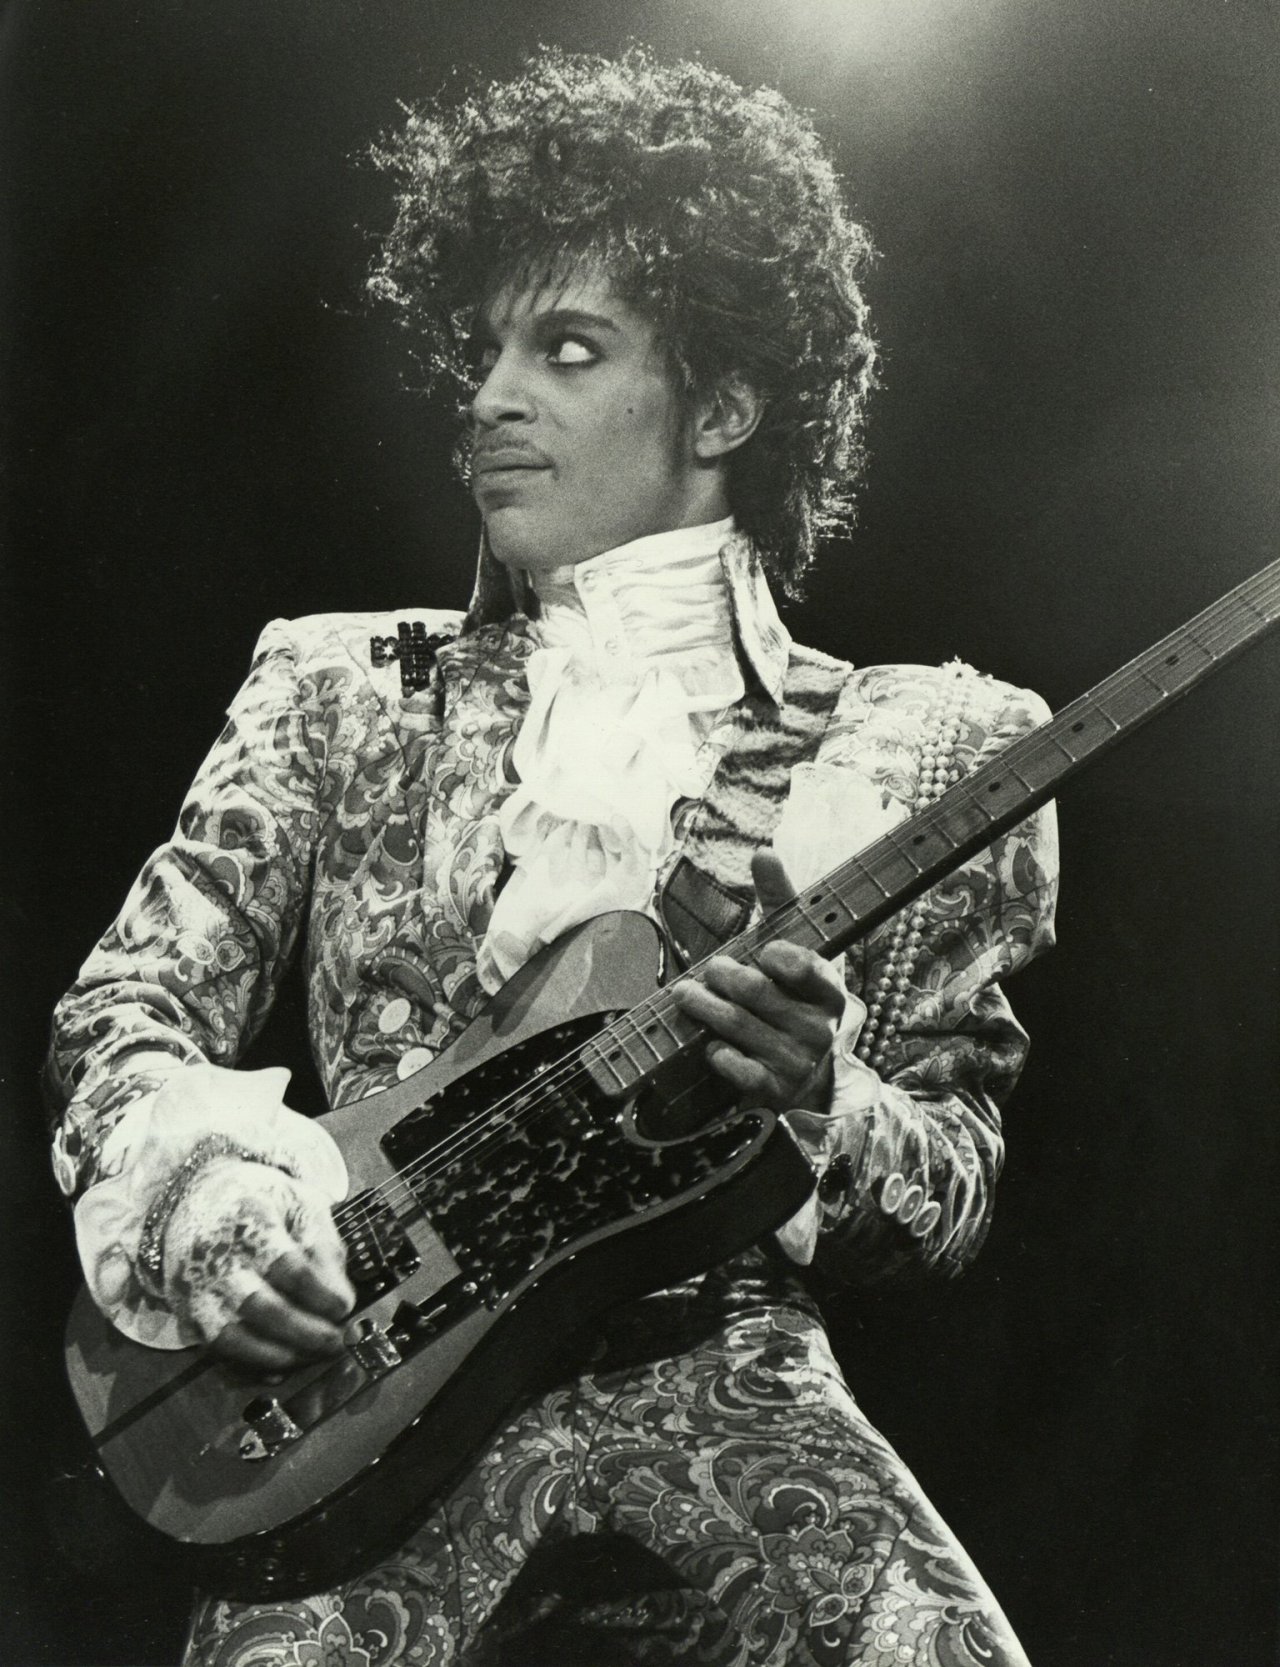 vogue:  We lost a true legend today. Goodbye, Prince.   This may come as a big surprise